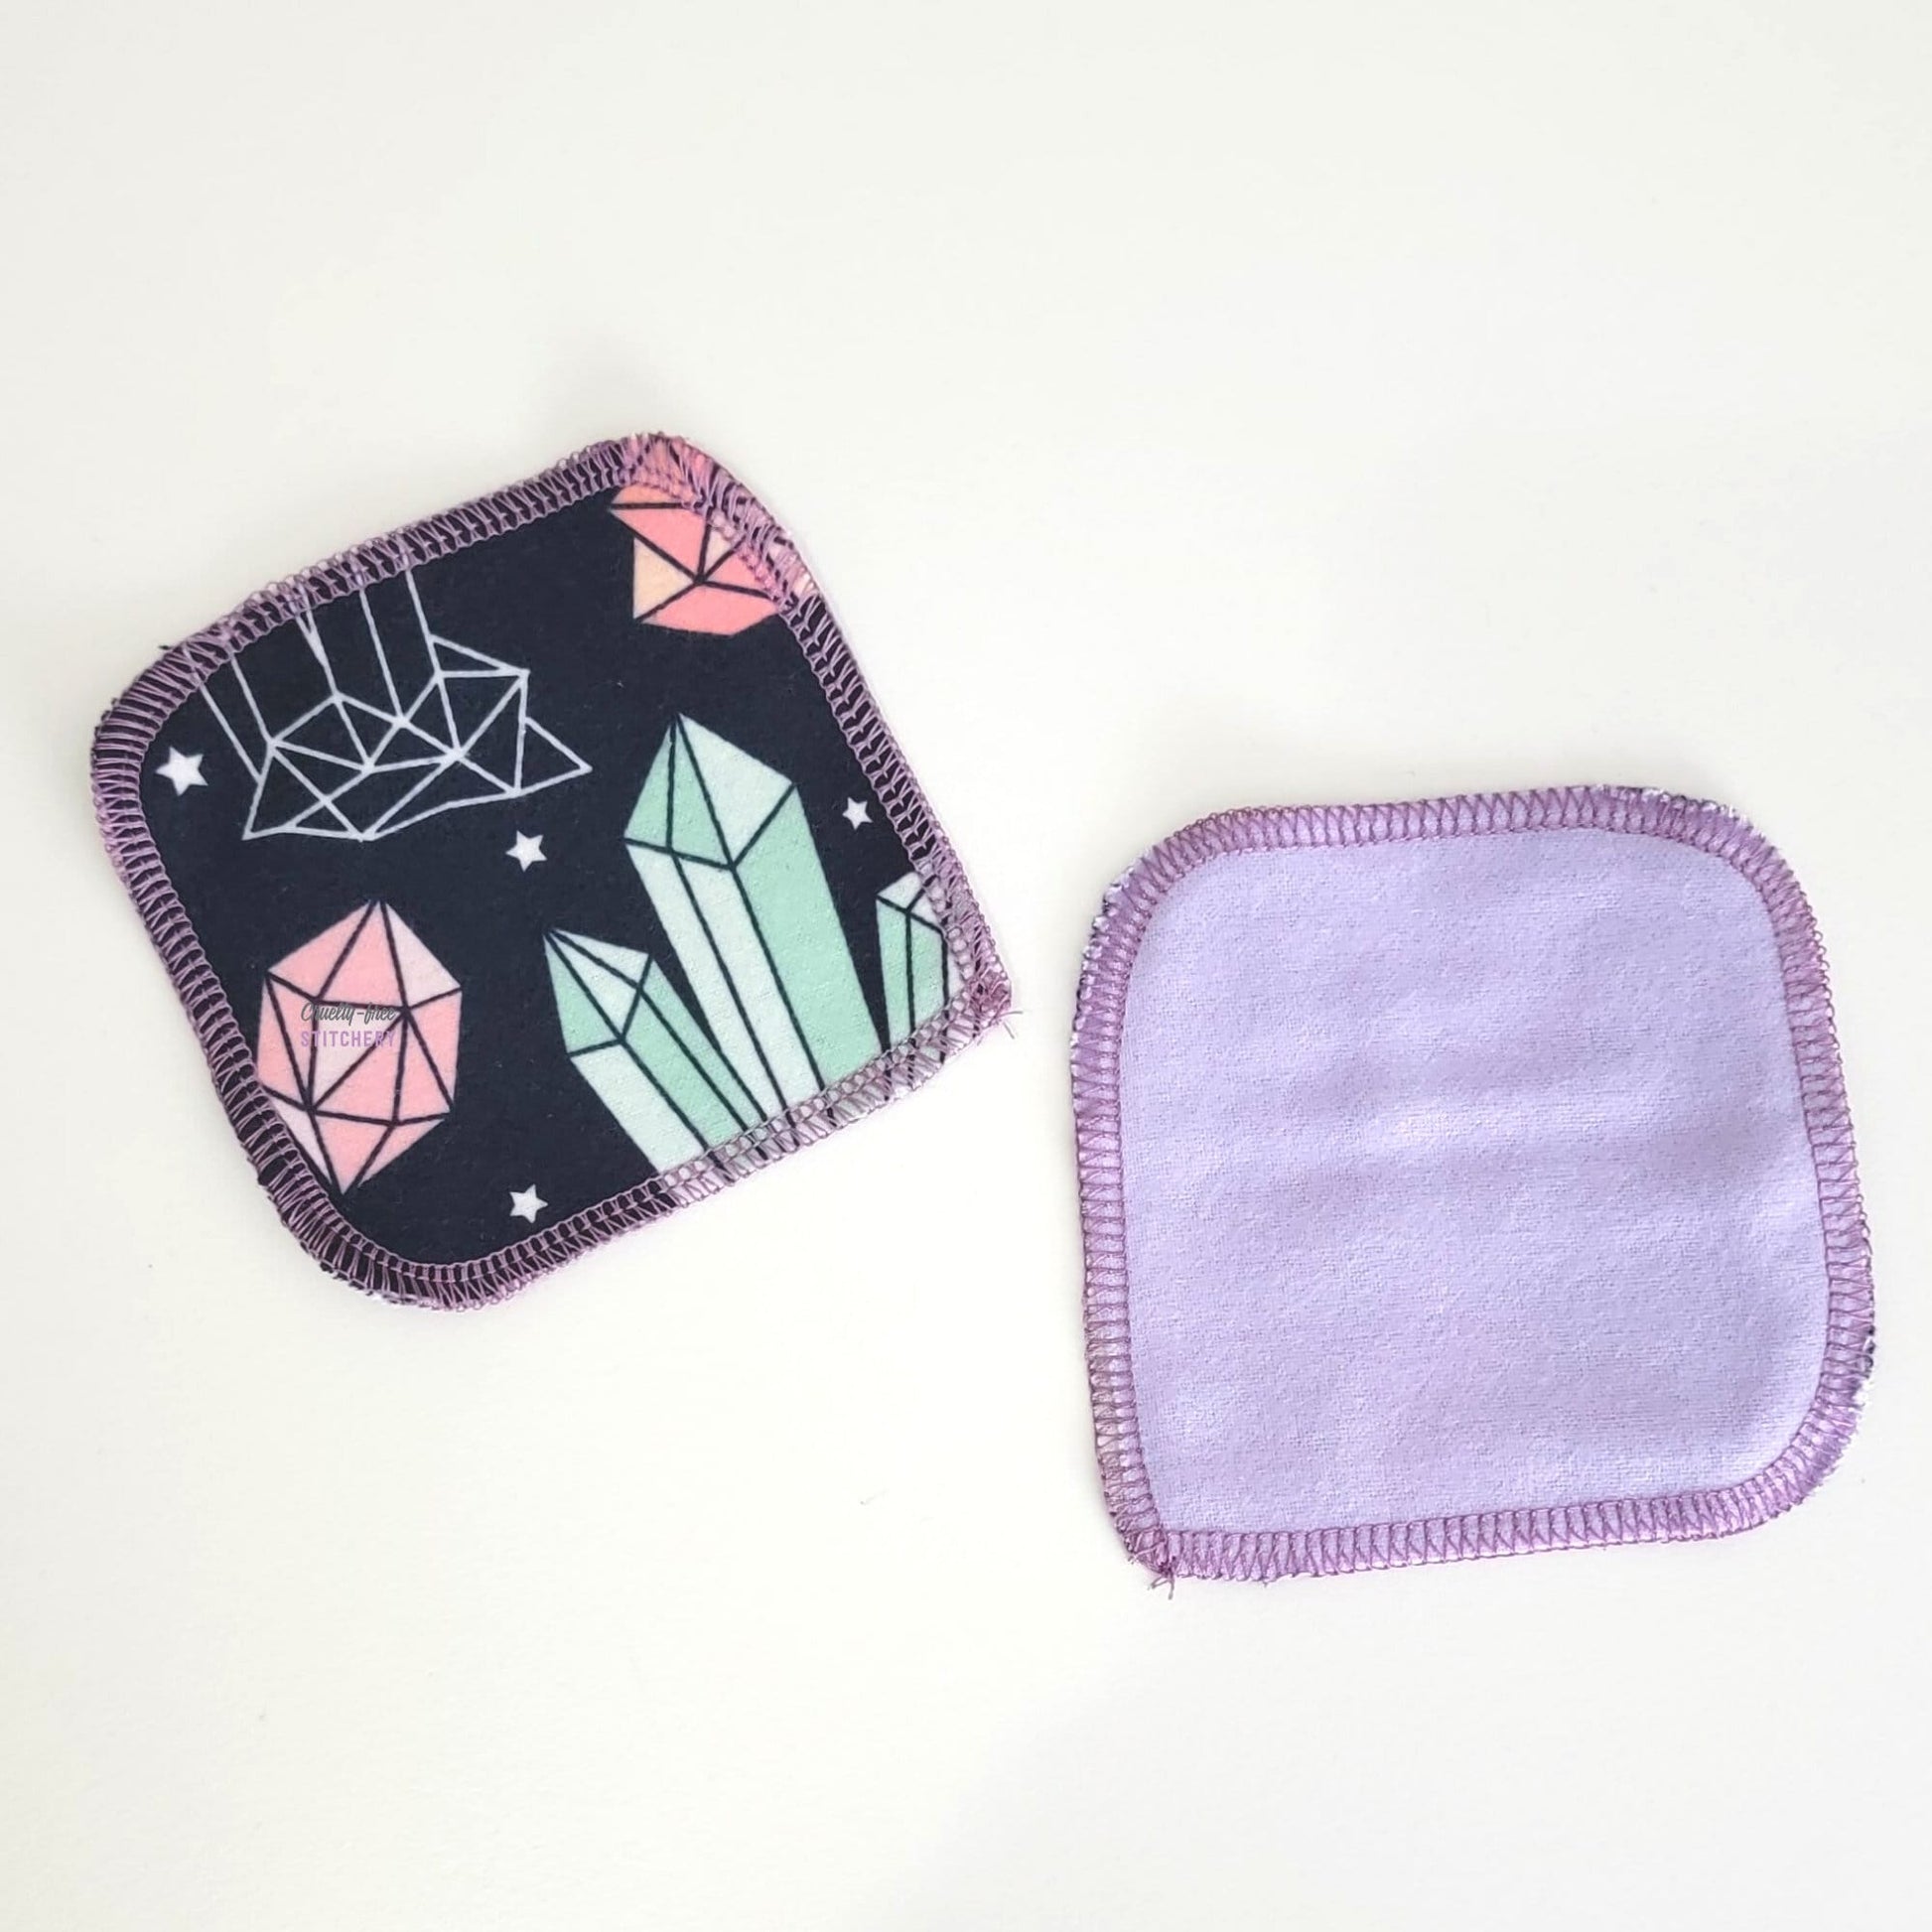 Two reusable cotton rounds, one face-up showing the crystals print, and one face-down showing the solid light purple on the back.